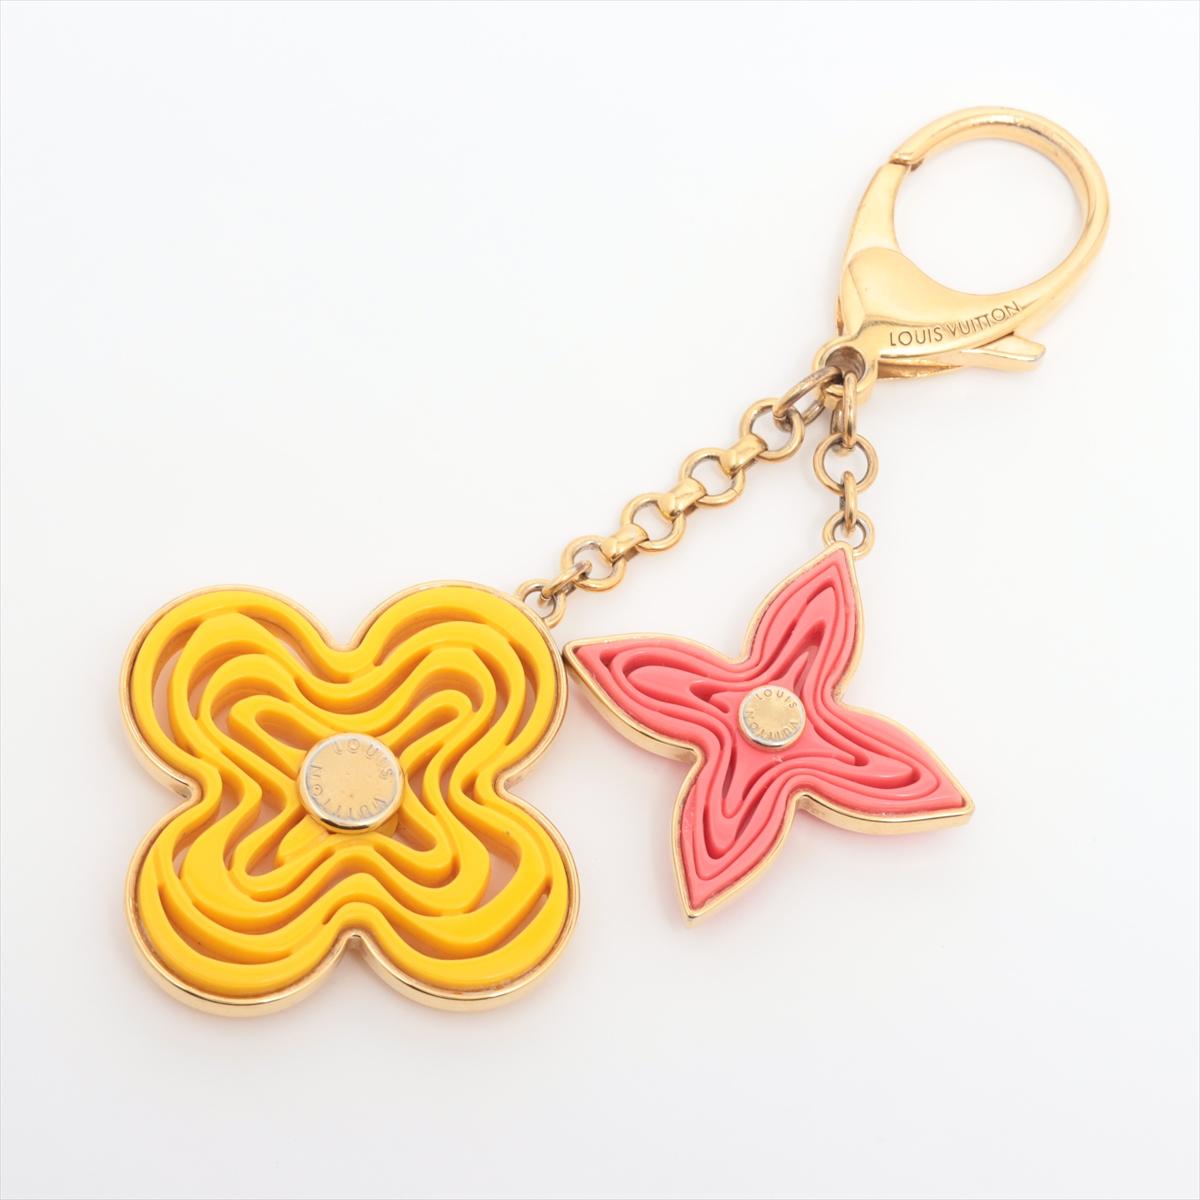 The Louis Vuitton Floral Bag Charm in Yellow & Pink a vibrant and charming accessory that enhances the personality of your Louis Vuitton bag. Meticulously crafted, the bag charm features a delightful combination of yellow and pink floral motifs,